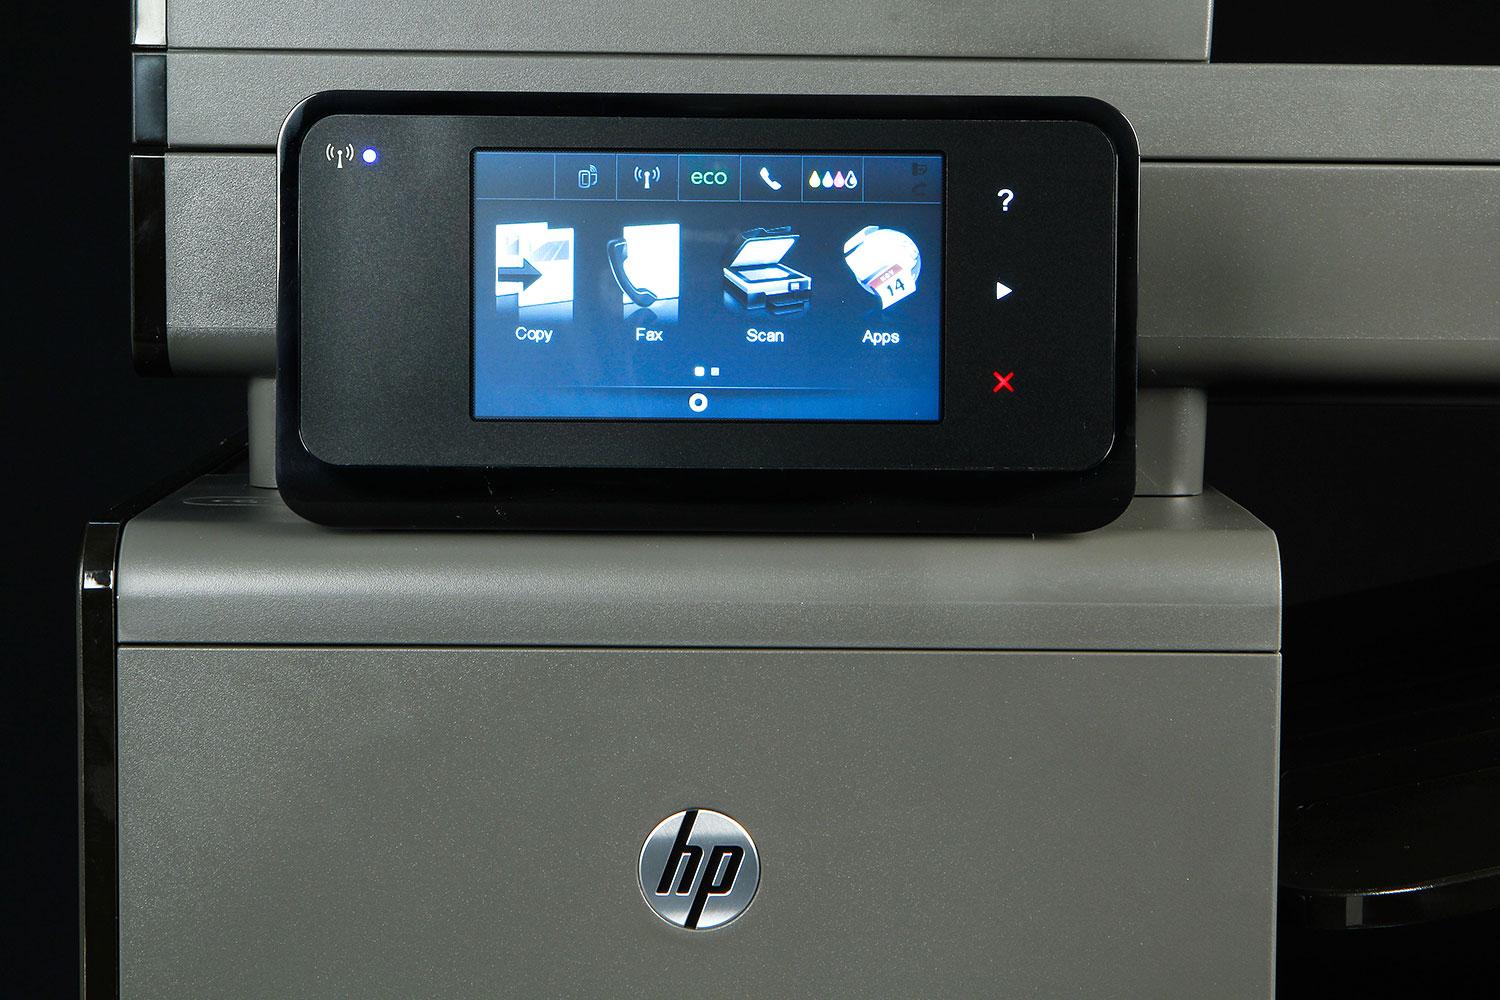 Exclusion go sightseeing temper HP OfficeJet Pro X576dw MFP review | Digital Trends